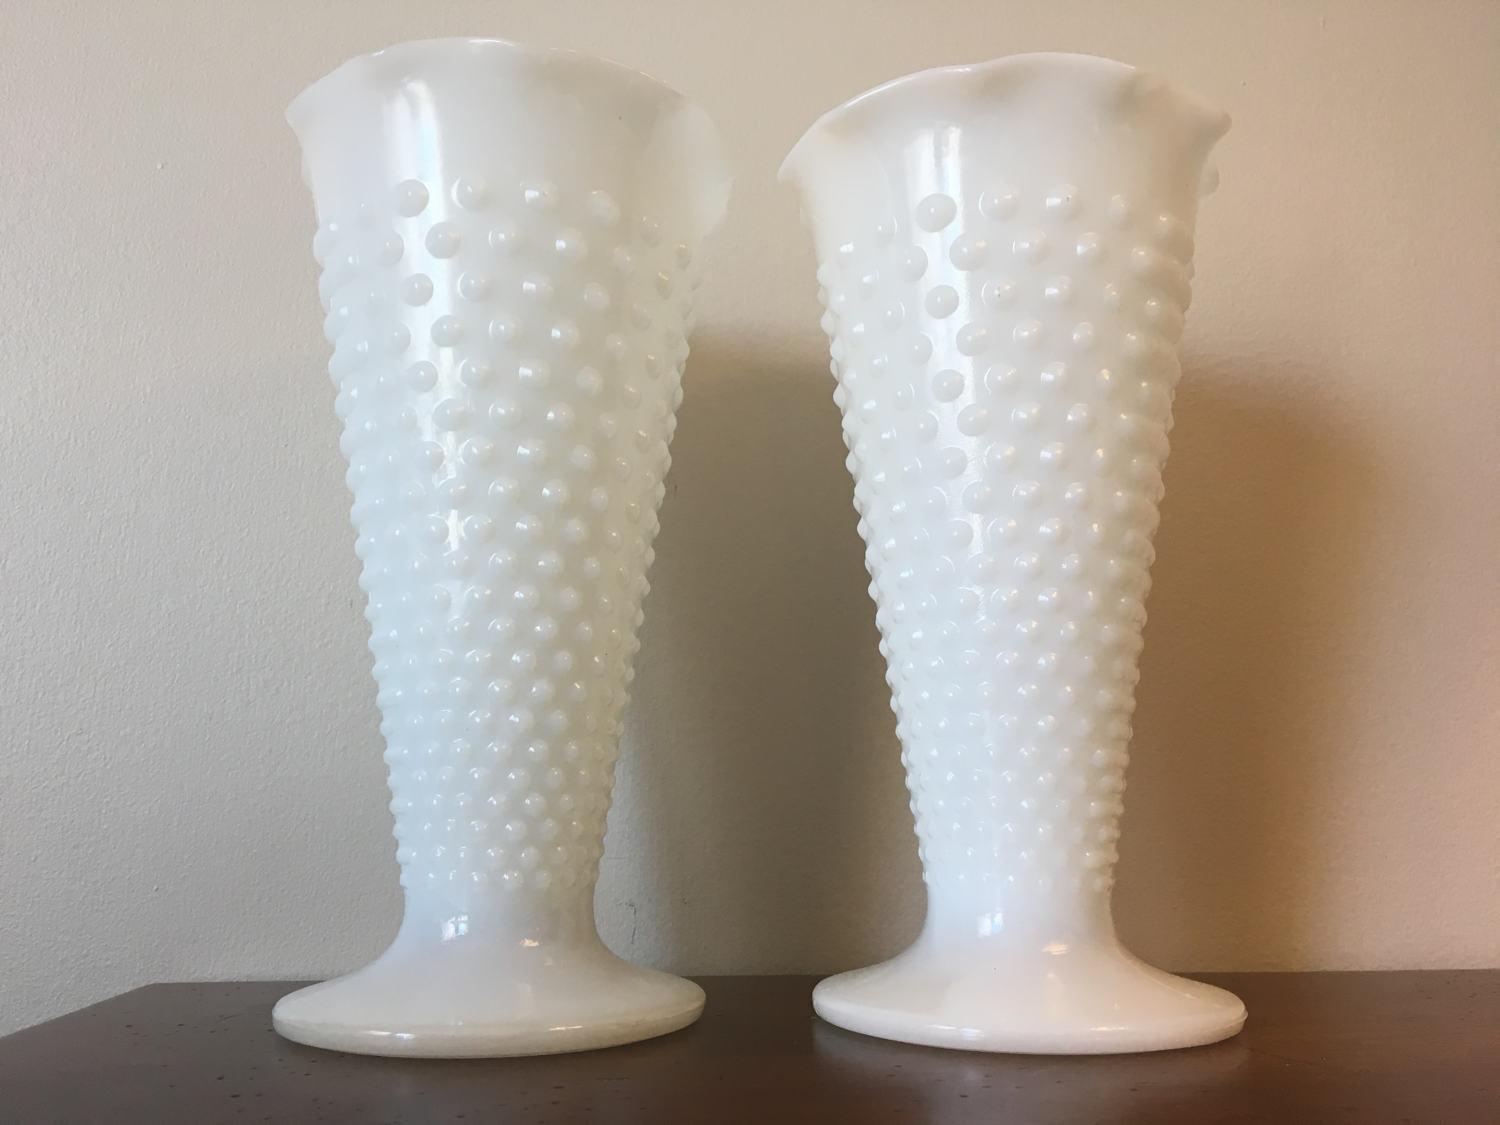 18 Recommended Anchor Hocking Glass Vases 2022 free download anchor hocking glass vases of pair of milk glass hobnail vases fire king white ruffled throughout dc29fc294c28ezoom